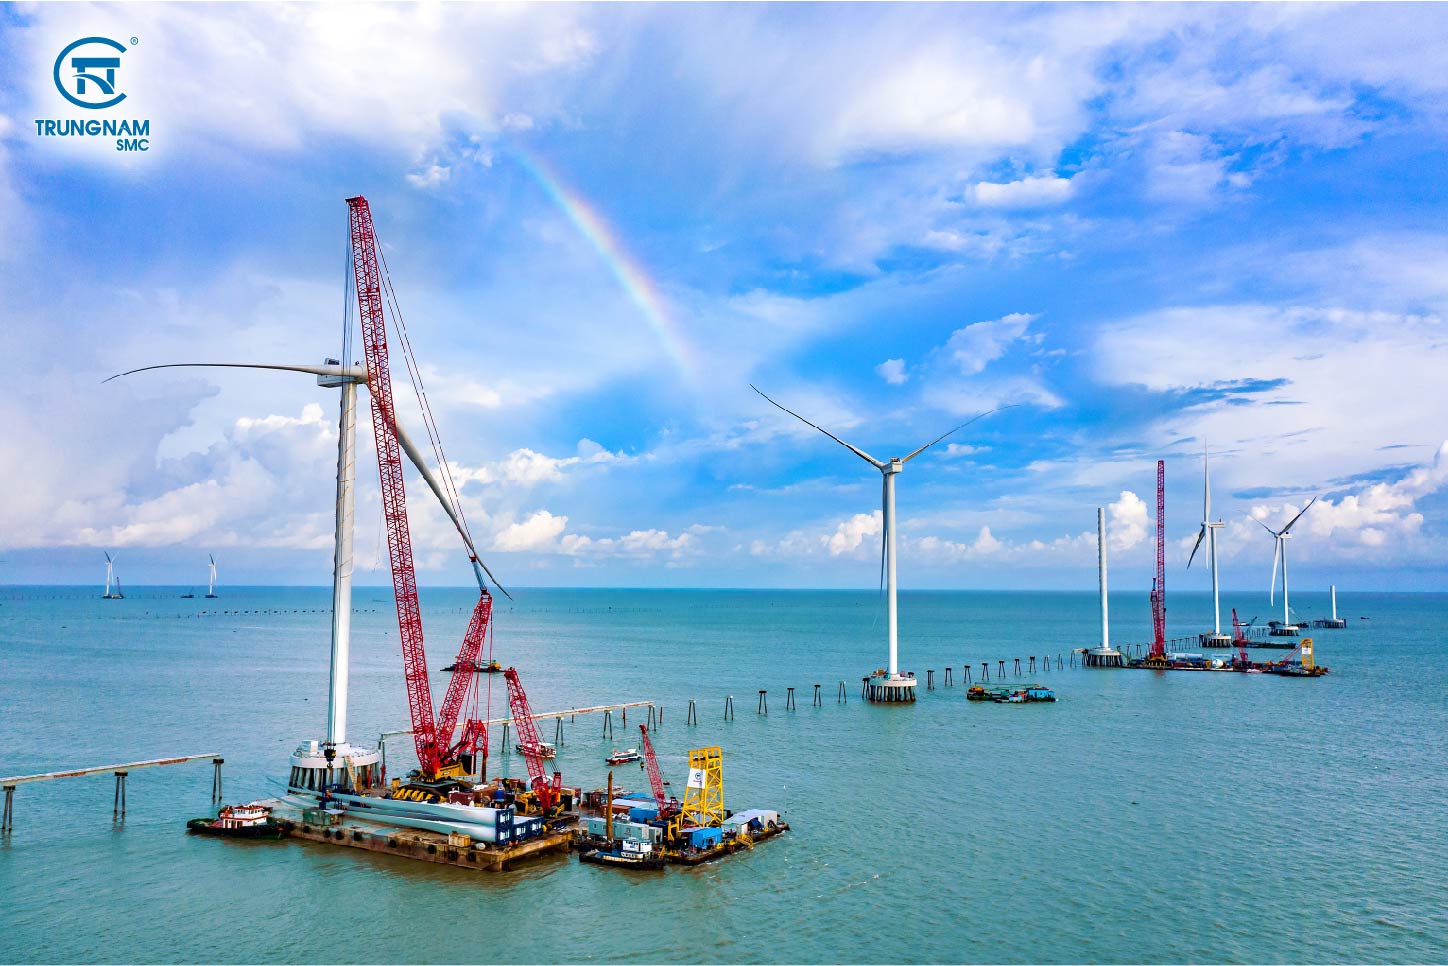 Construction and installation on the sea of Dong Hai 1 - Tra Vinh wind power project